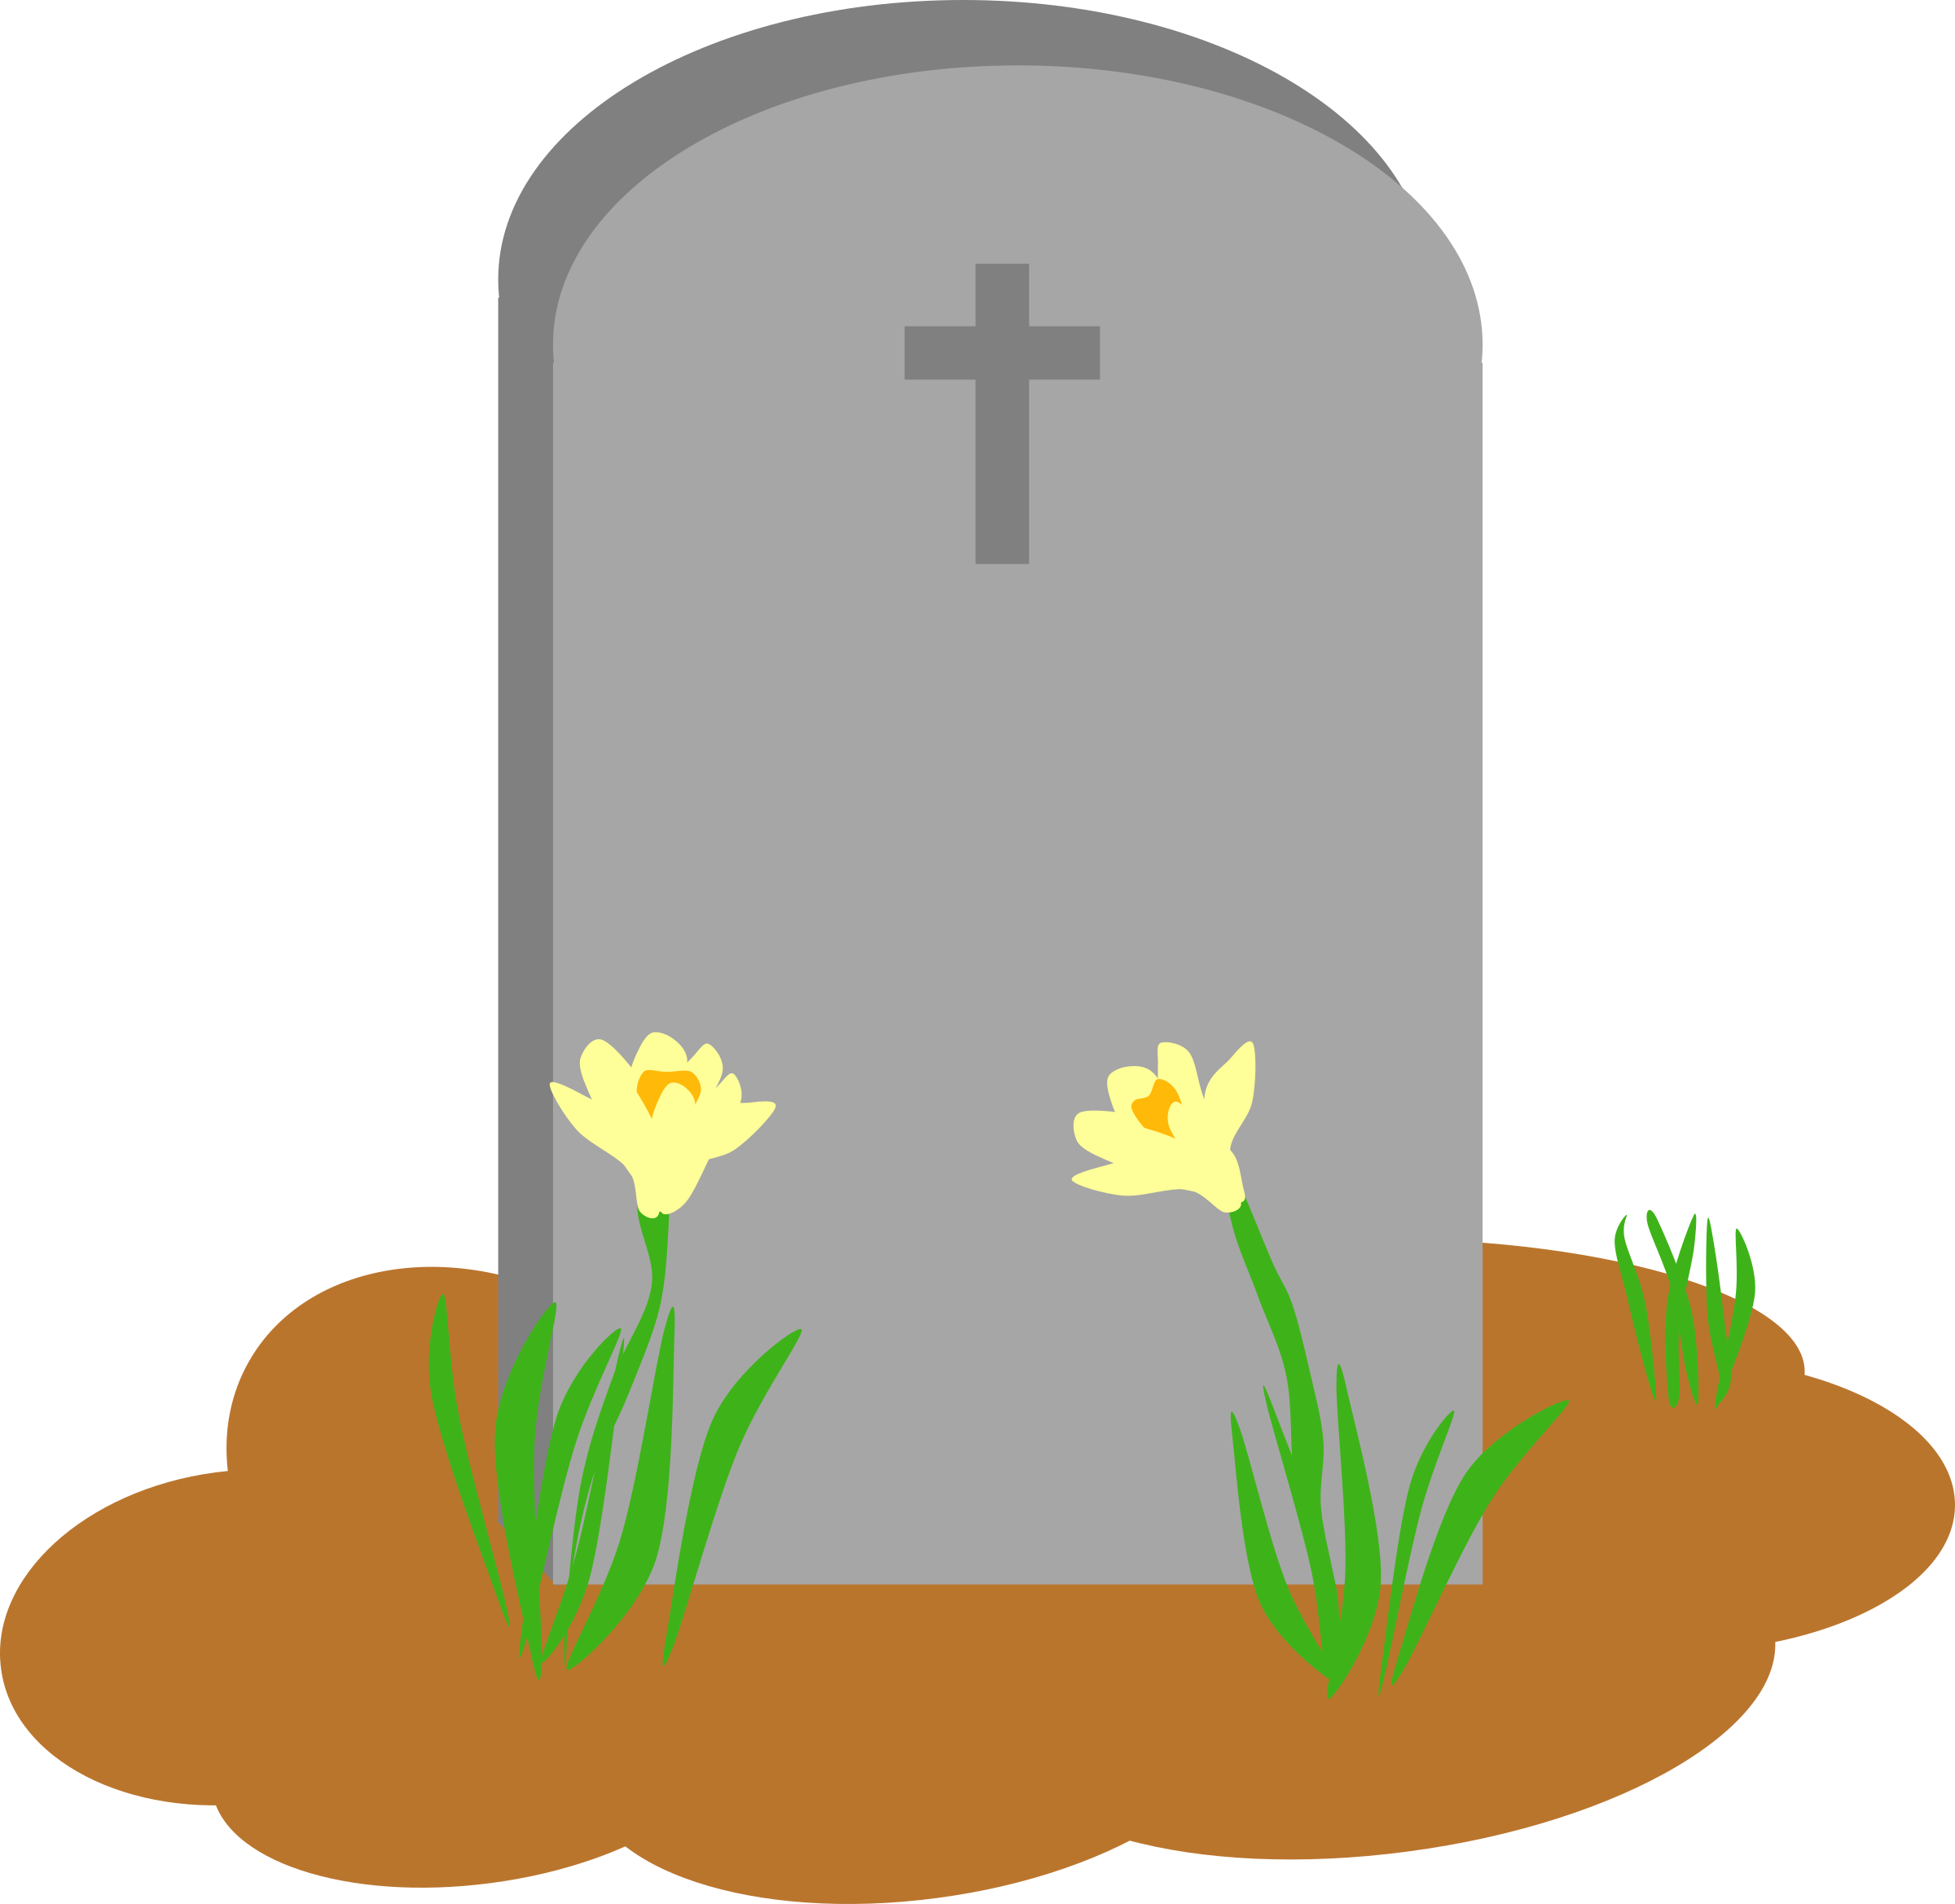 Tombstone and Grave Vector art image